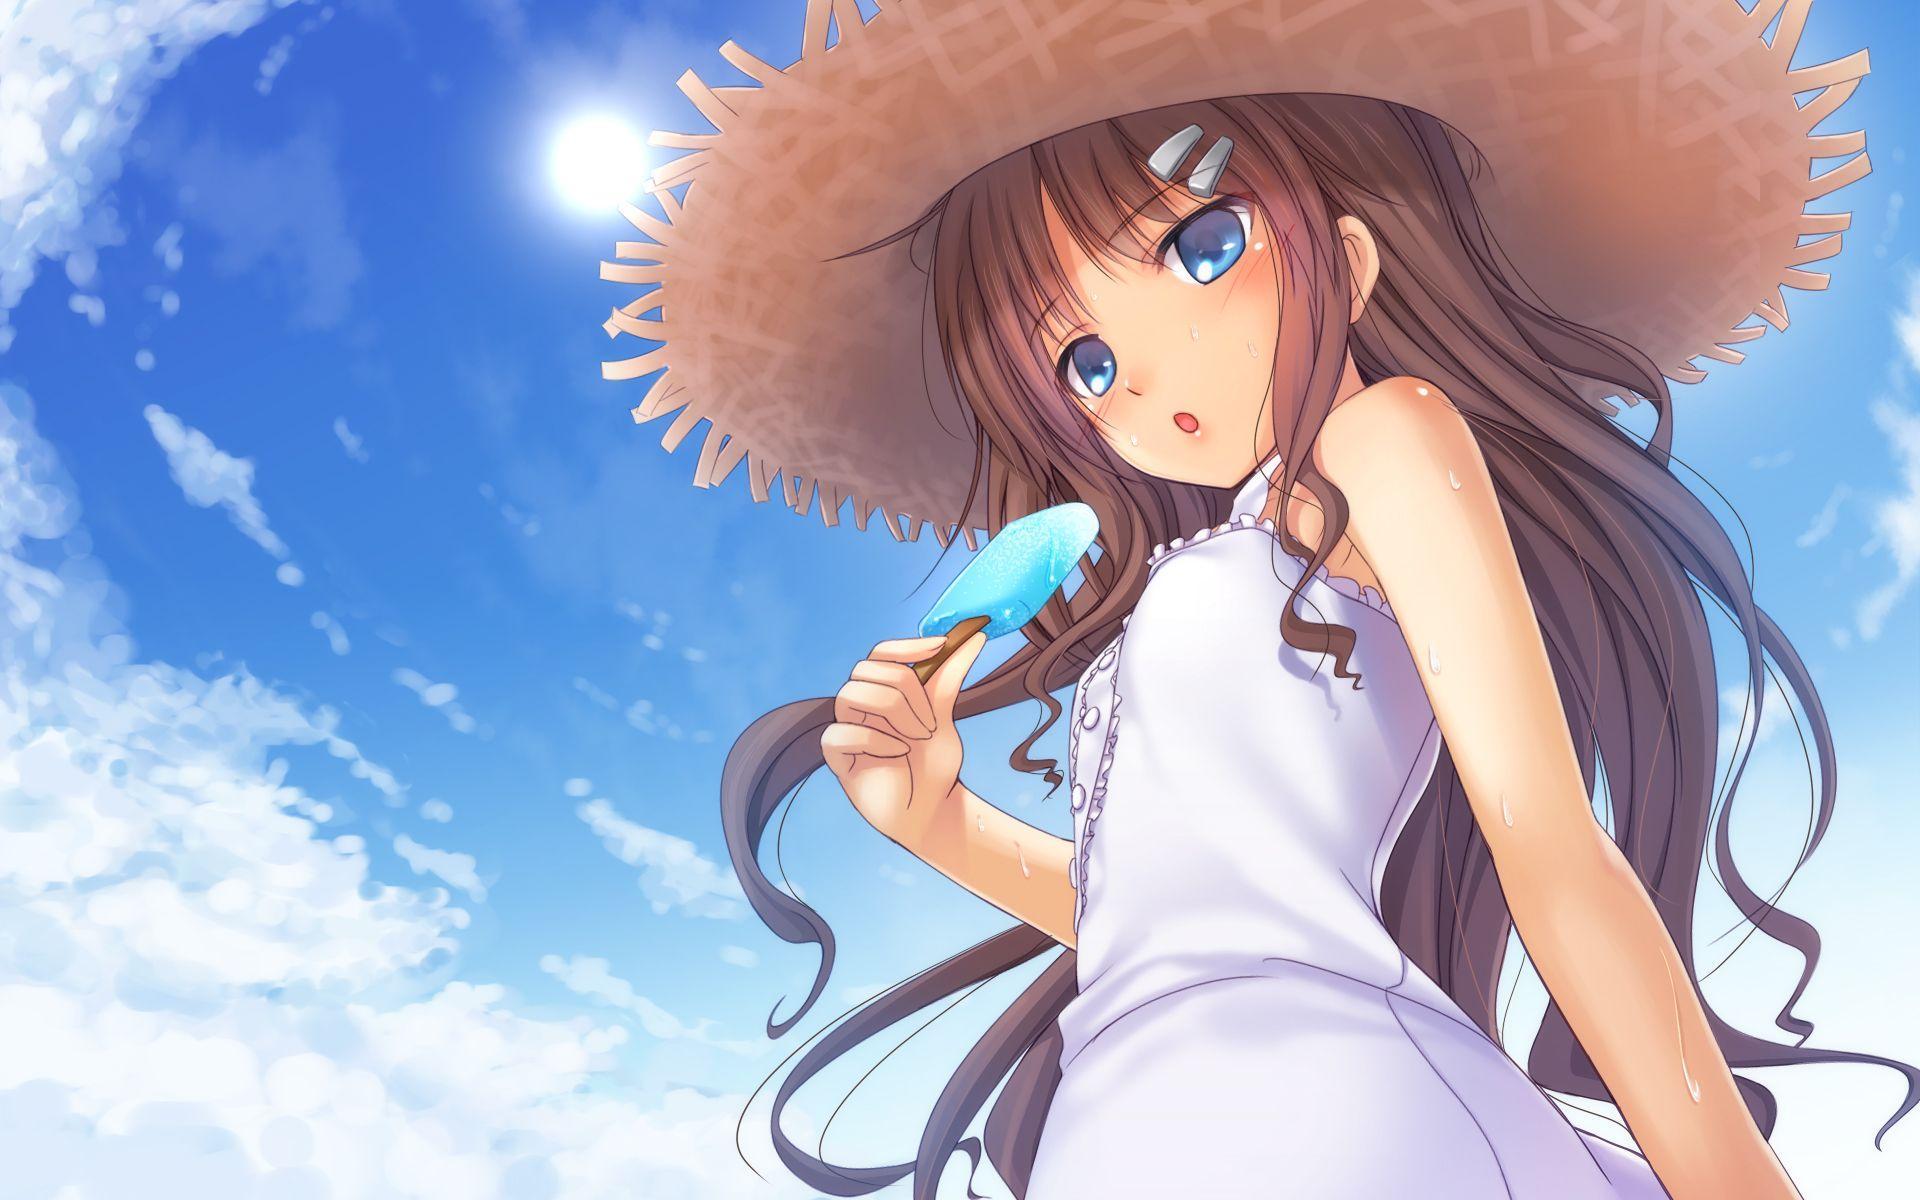 Stare of anime girl with long black hair white dress blue eyes by window  with sky and city view 2K wallpaper download